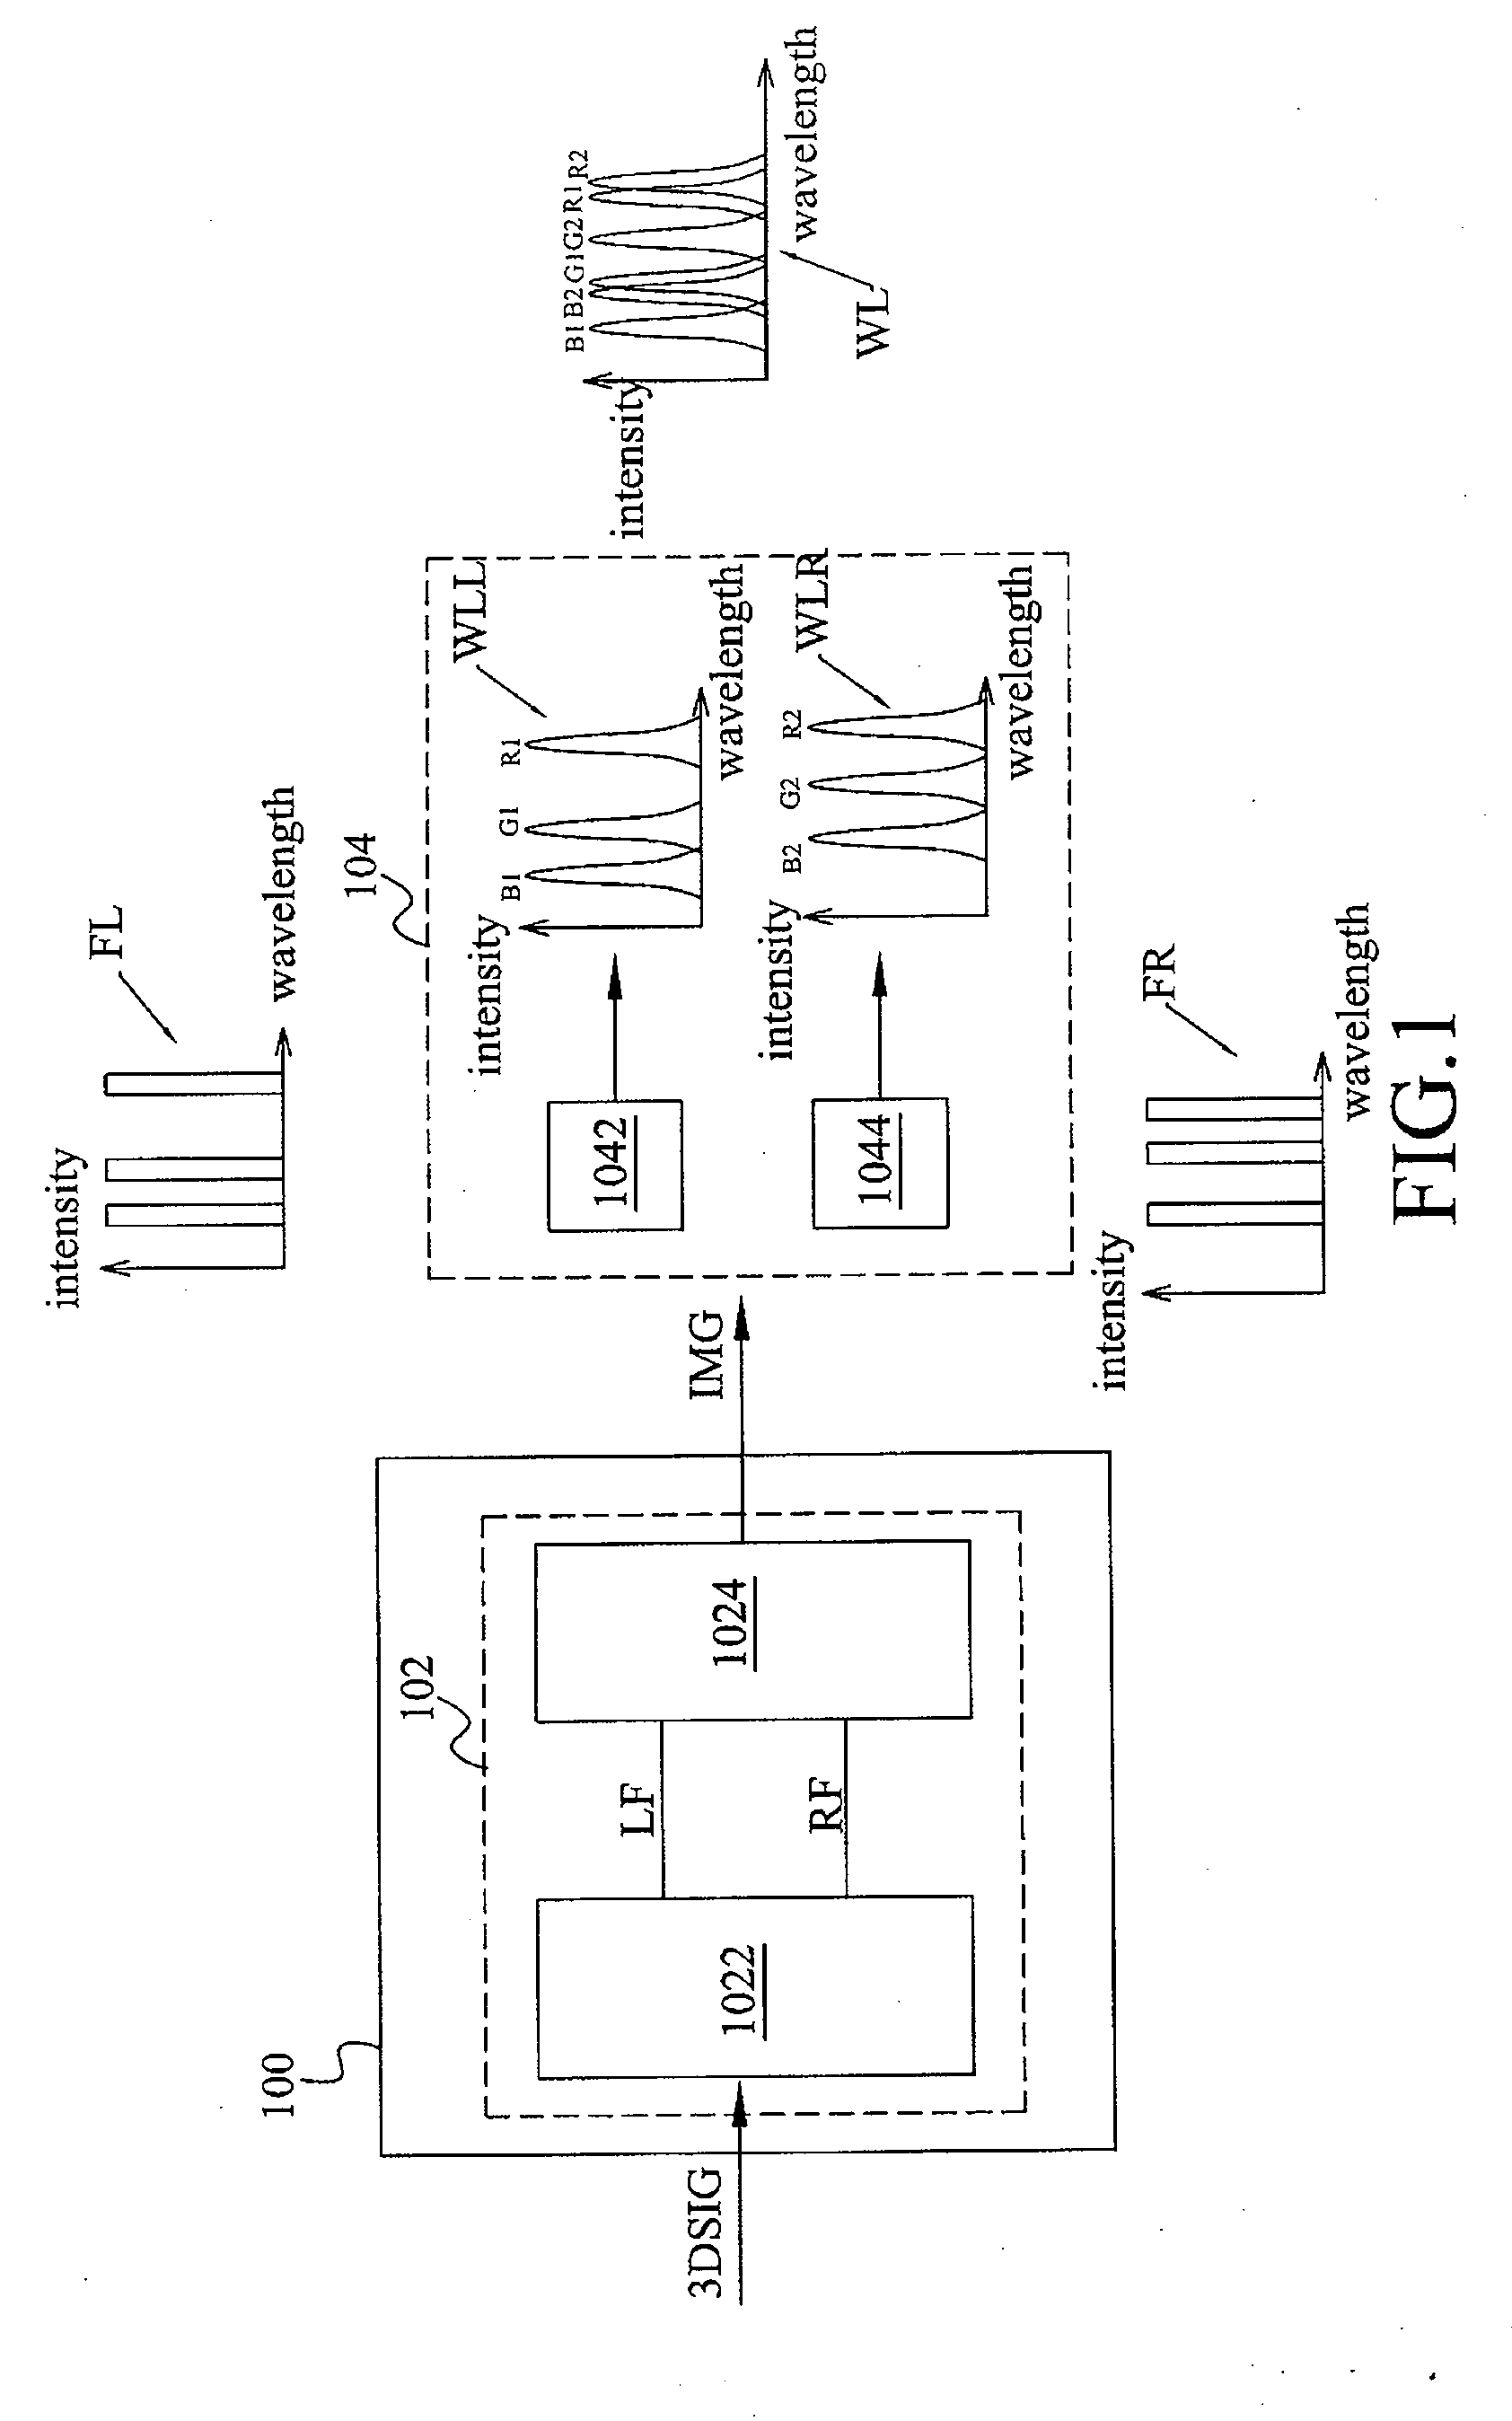 Display device for three dimensional (3D) images